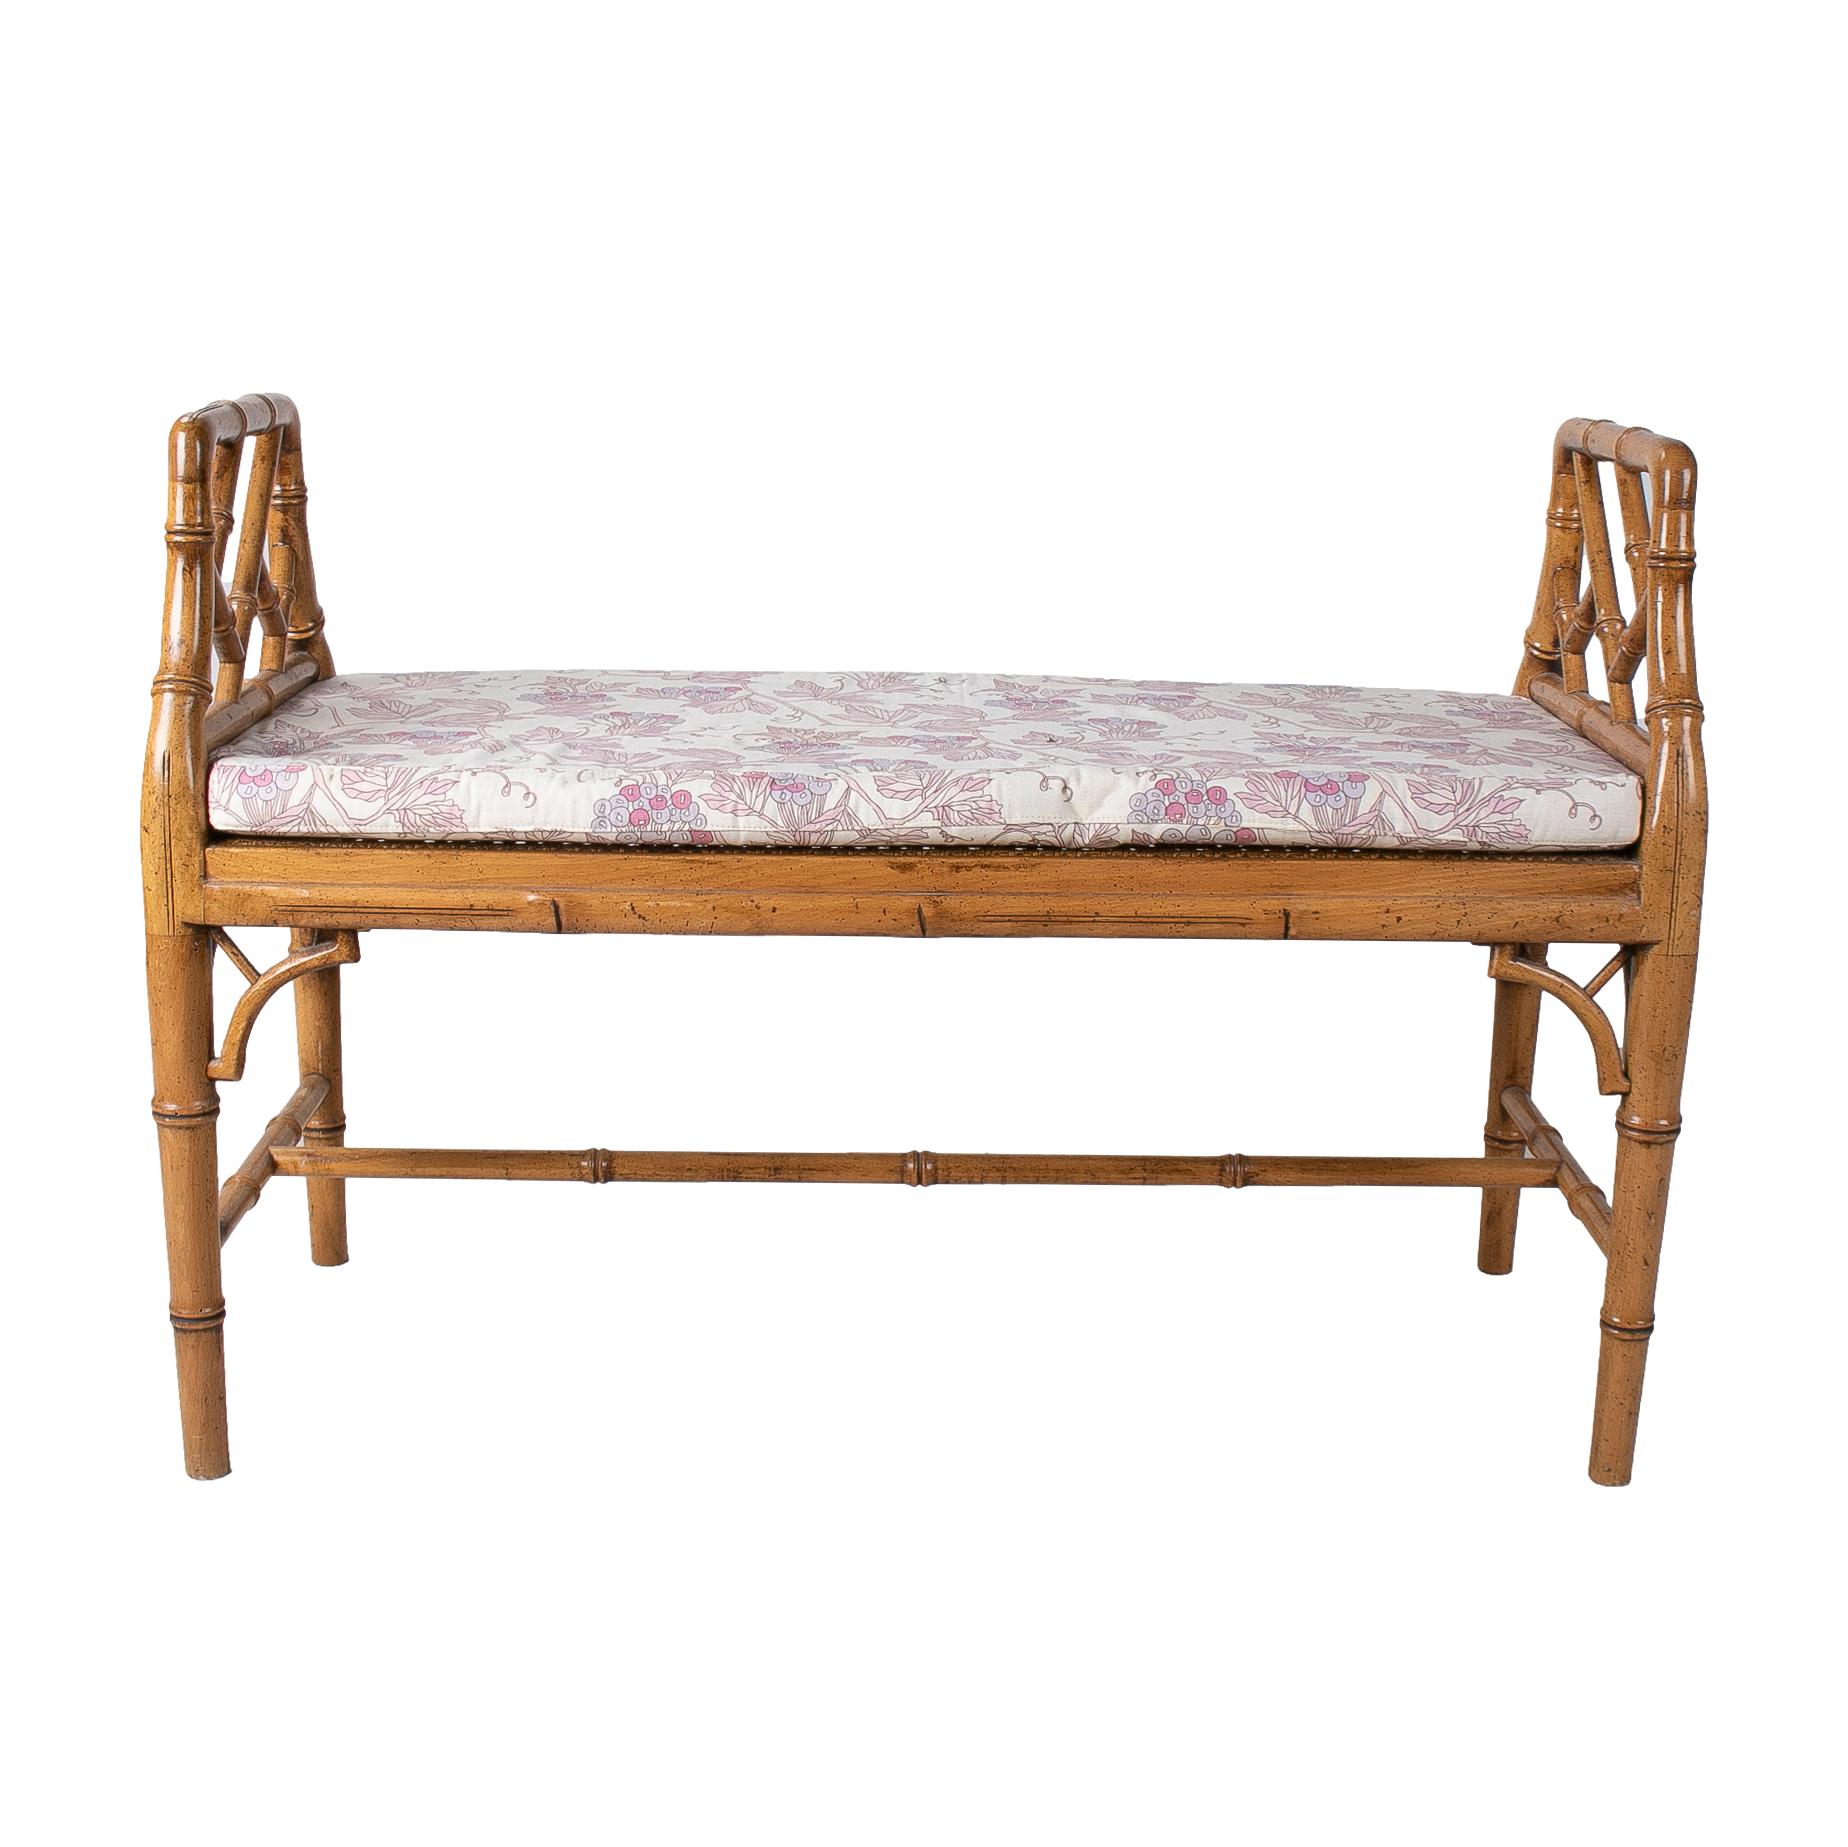 Vintage 1980s Spanish faux bamboo wooden long stool backless bench.